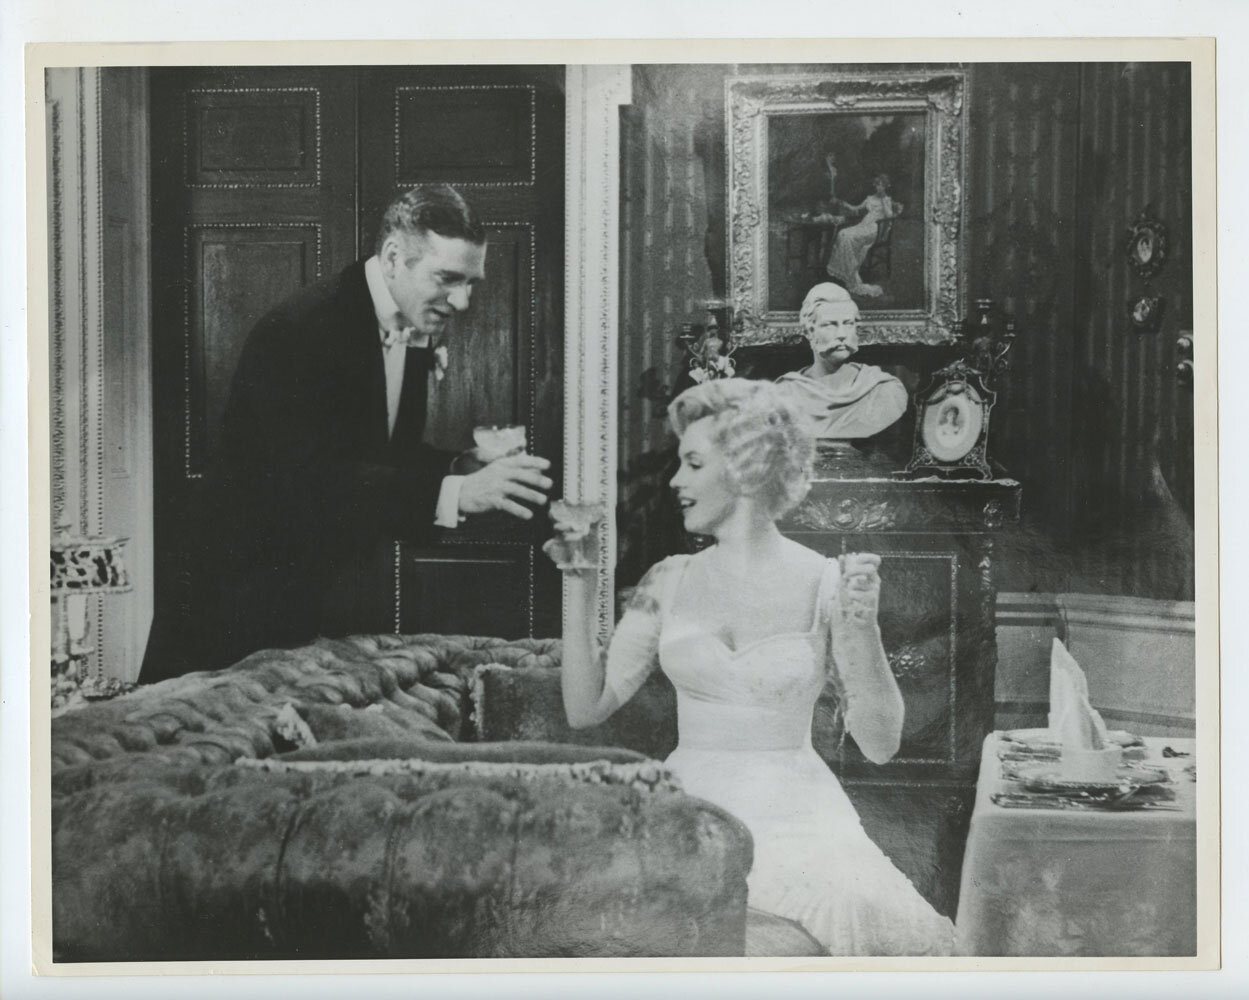 Marilyn Monroe Laurence Olivier Photo 1957 The Prince and the Showgirl Original Vintage